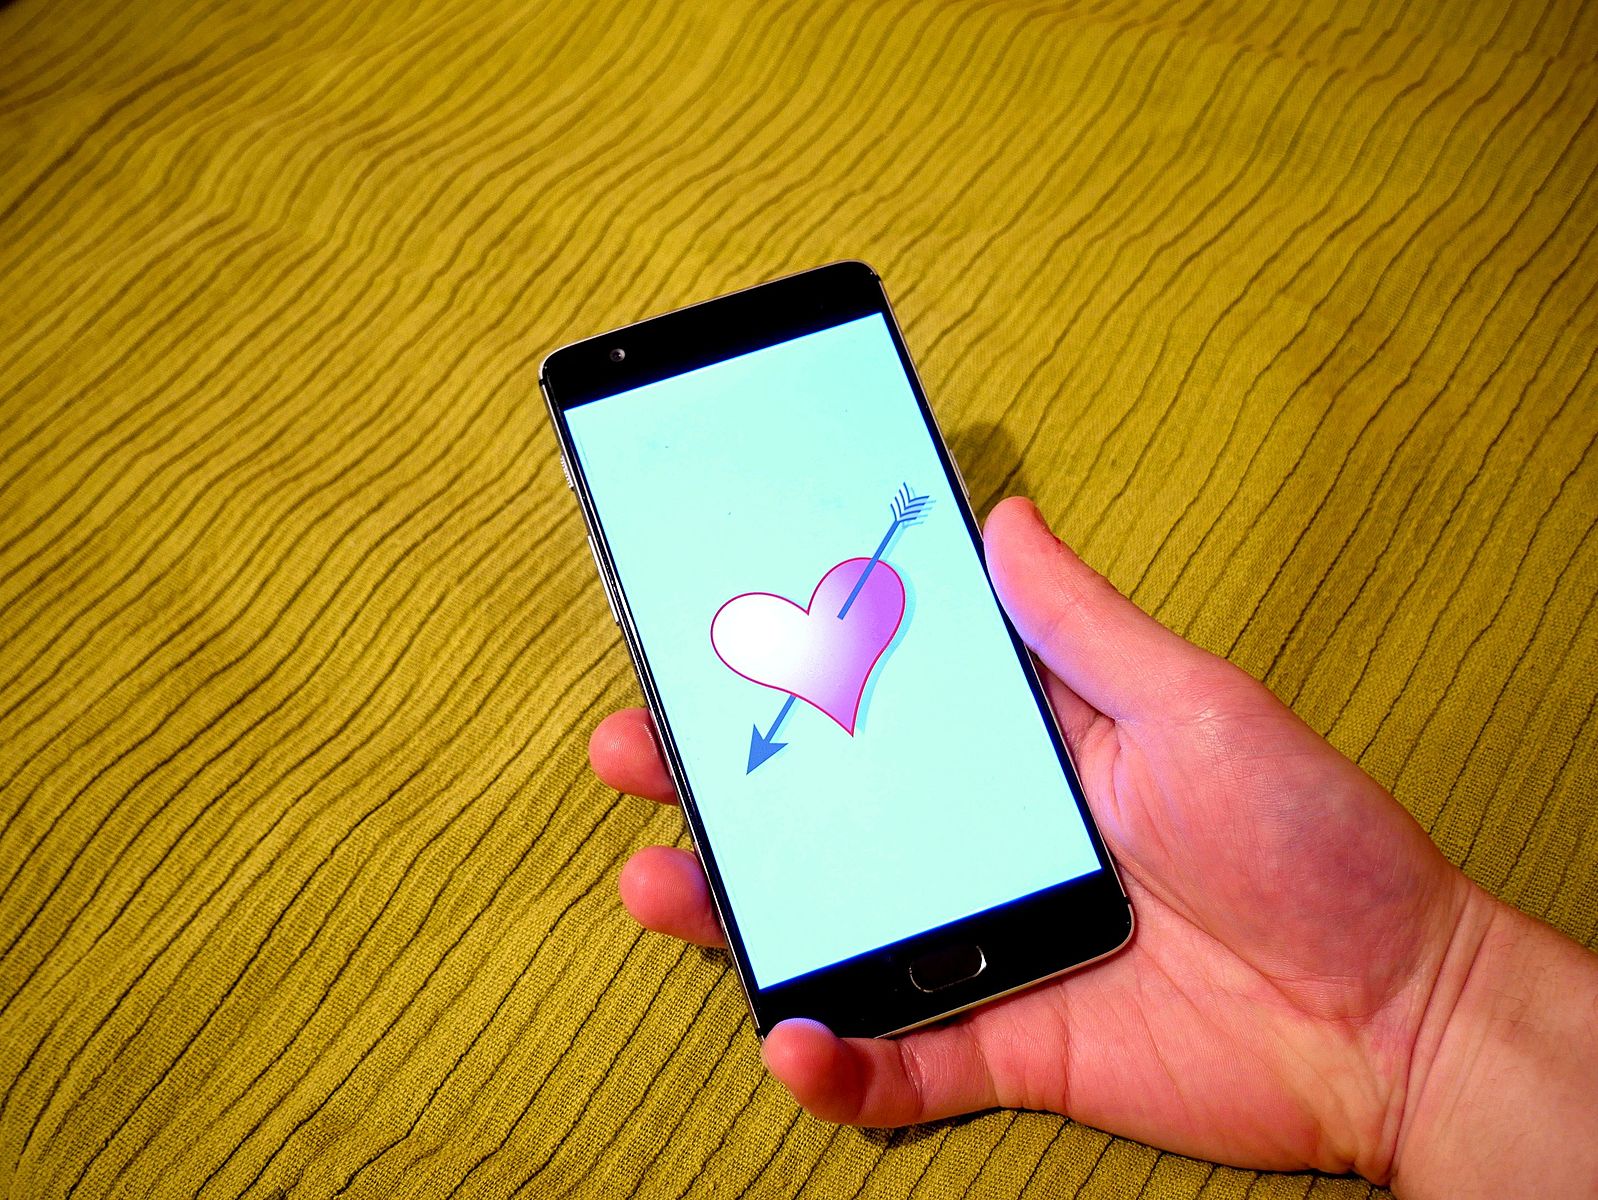 Smartphone with a picture of a heart on the phone screen